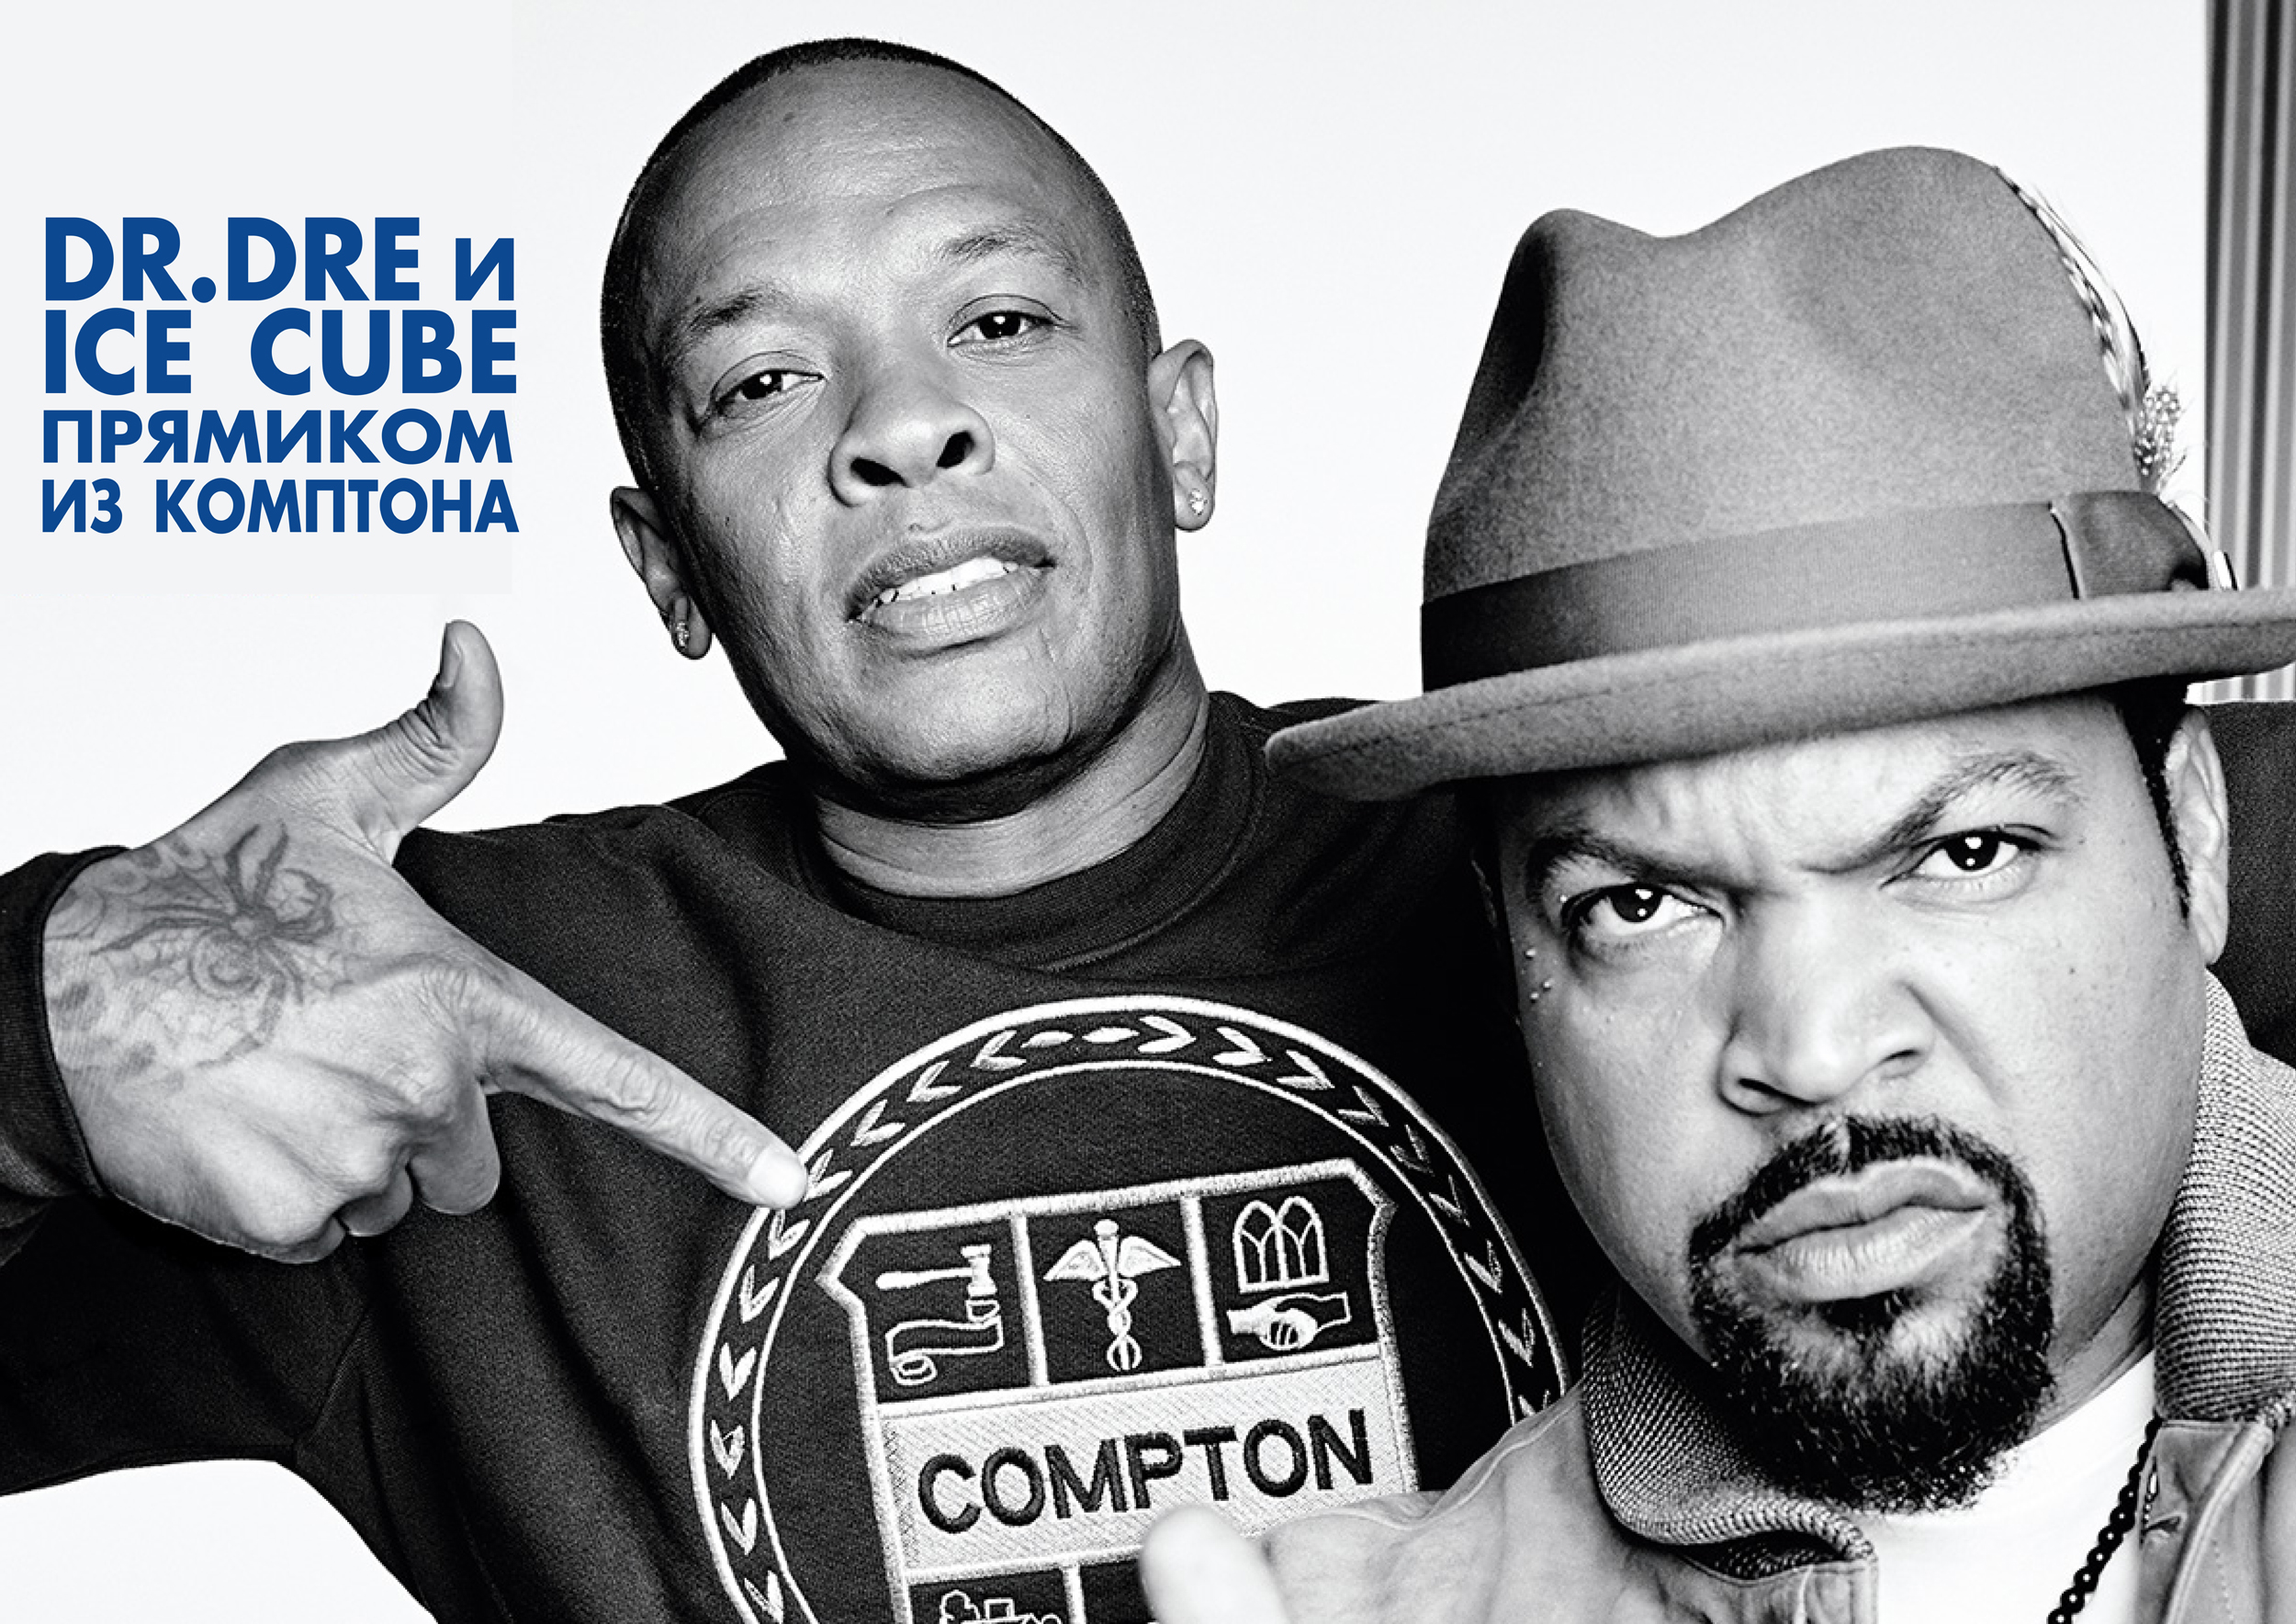 Dr. Dre and Ice Cube 2015